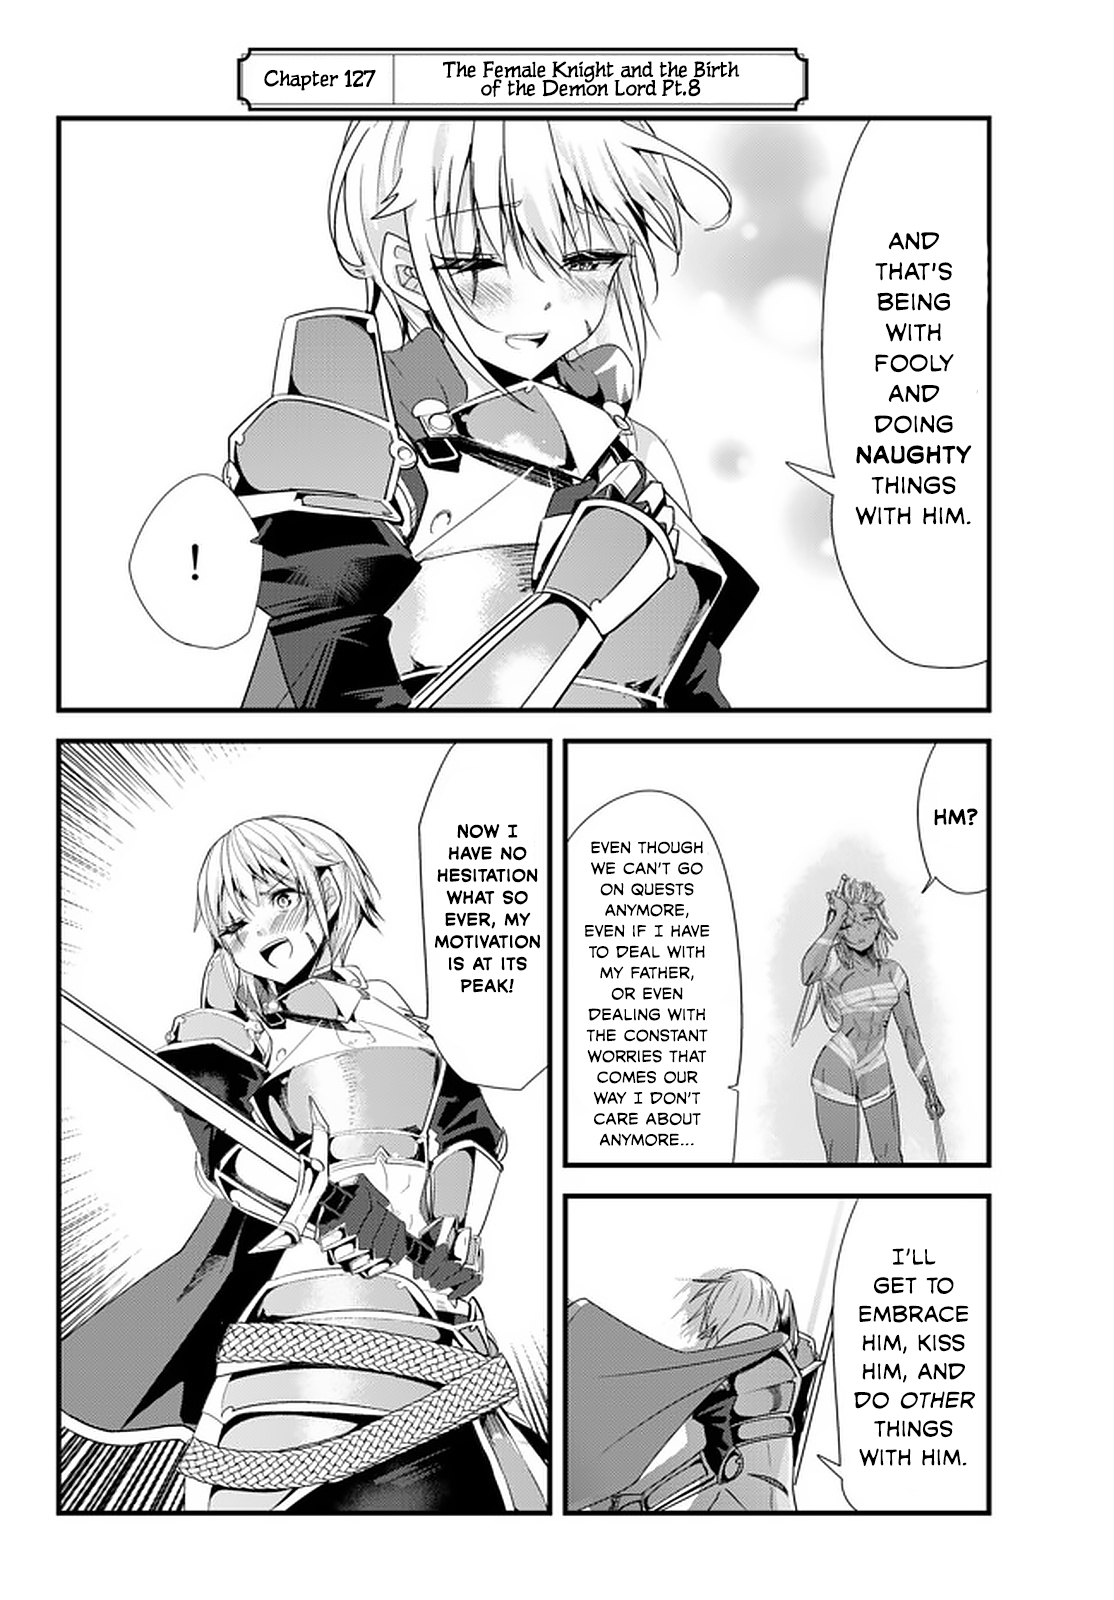 A Story About Treating a Female Knight, Who Has Never Been Treated as a Woman, as a Woman - Chapter 127 Page 2